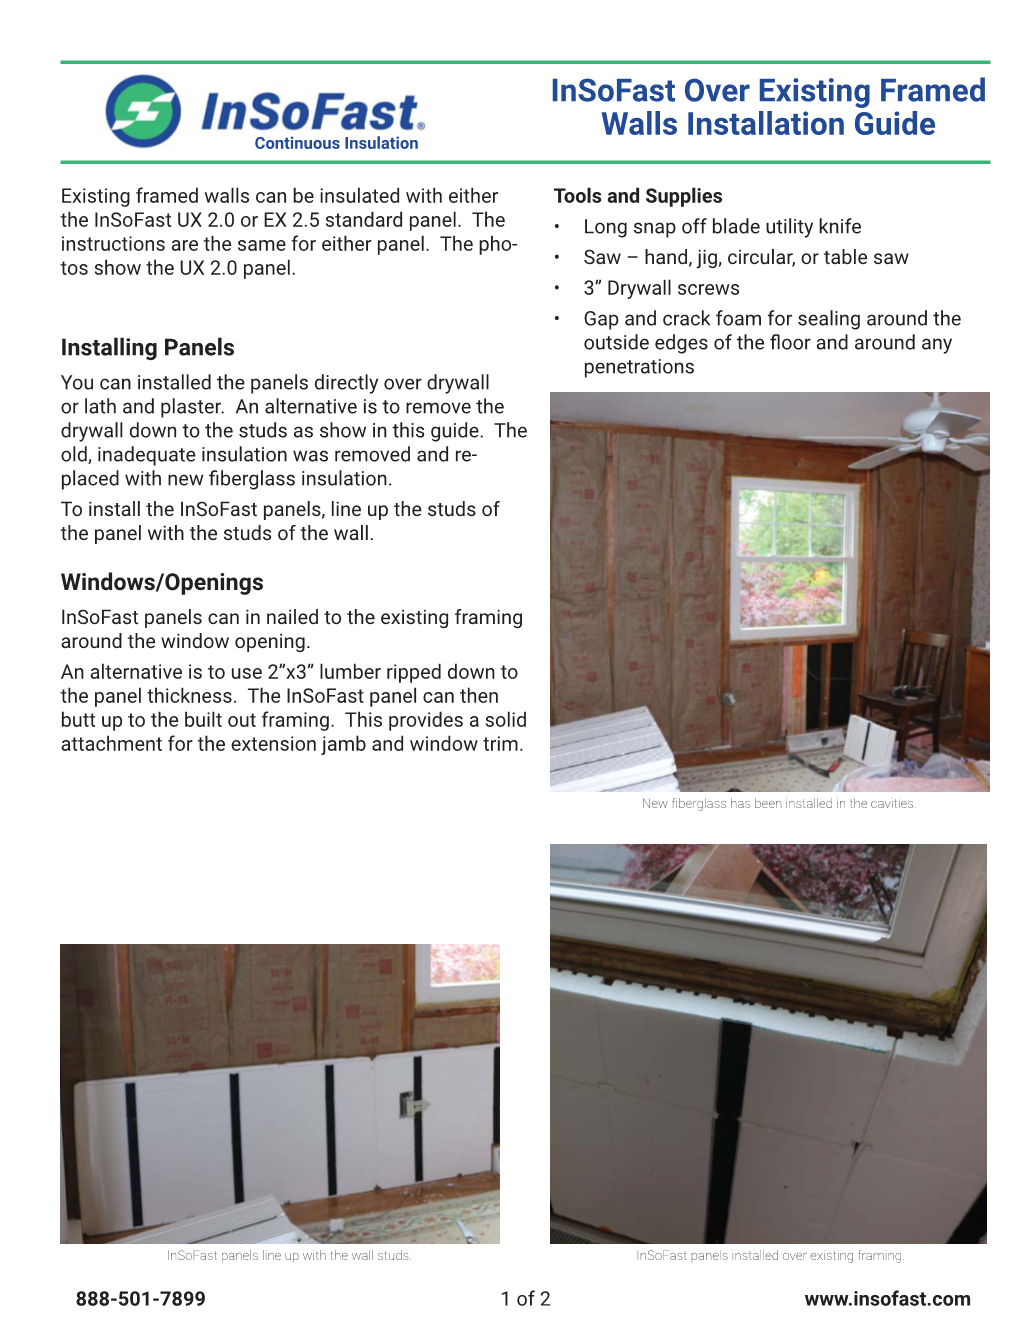 Insofast Over Existing Interior Walls Installation Instructions.Indd